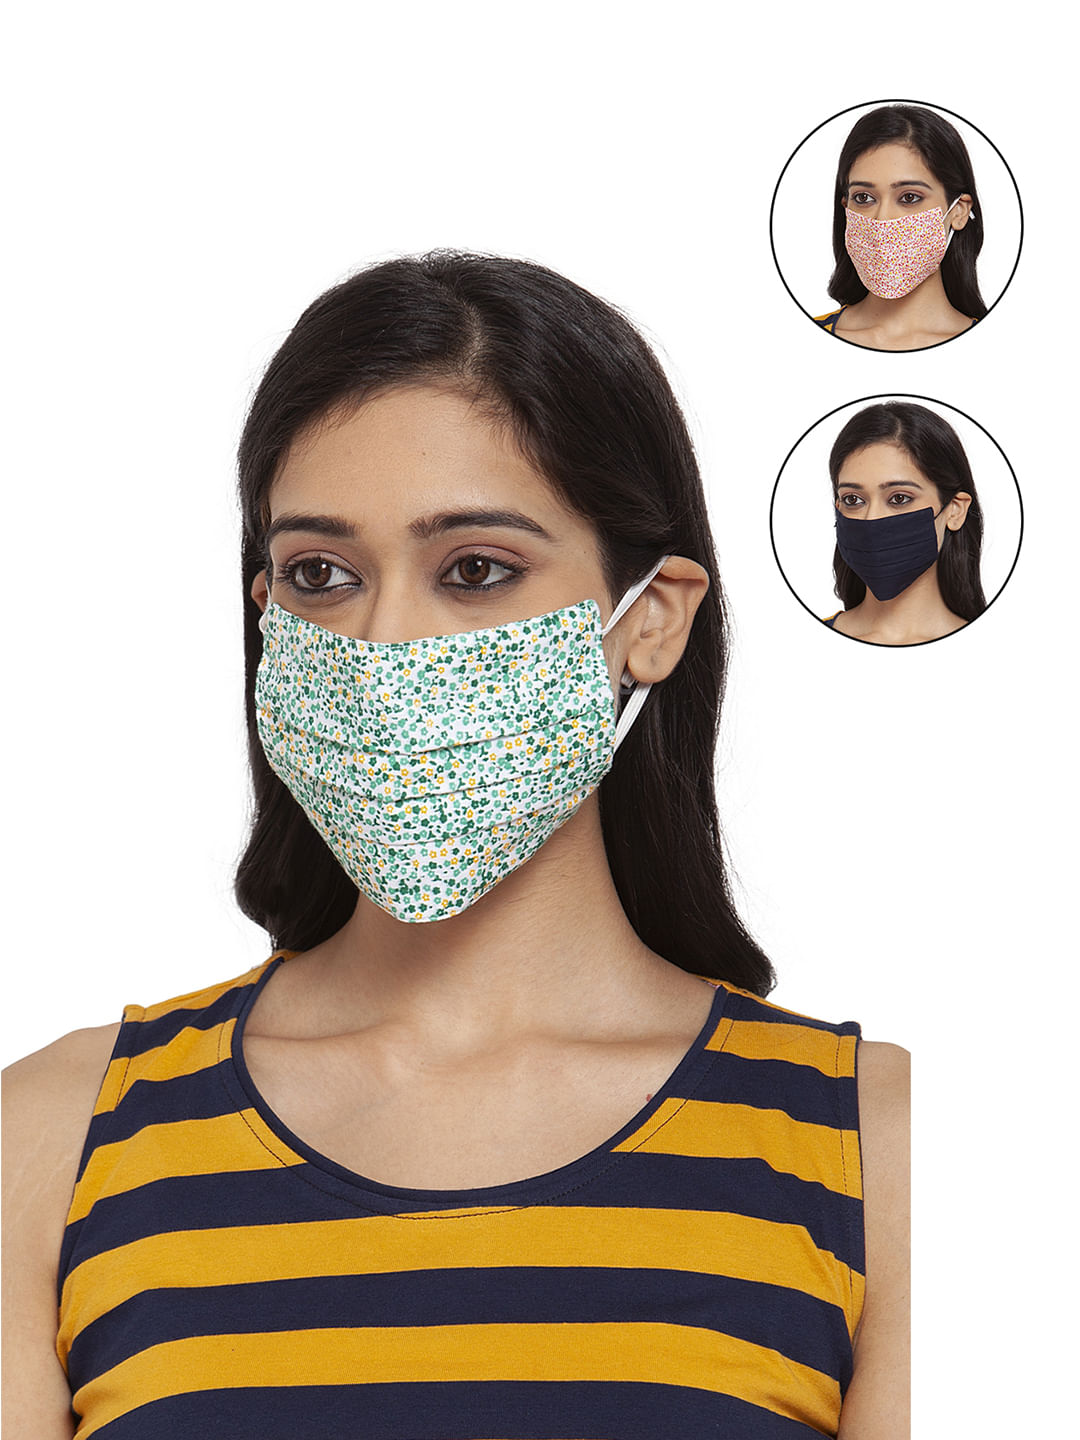 Unisex 3-Layer Adjustable & Stretchable Protective Mask with Ear Loops - Size L - Set of 3